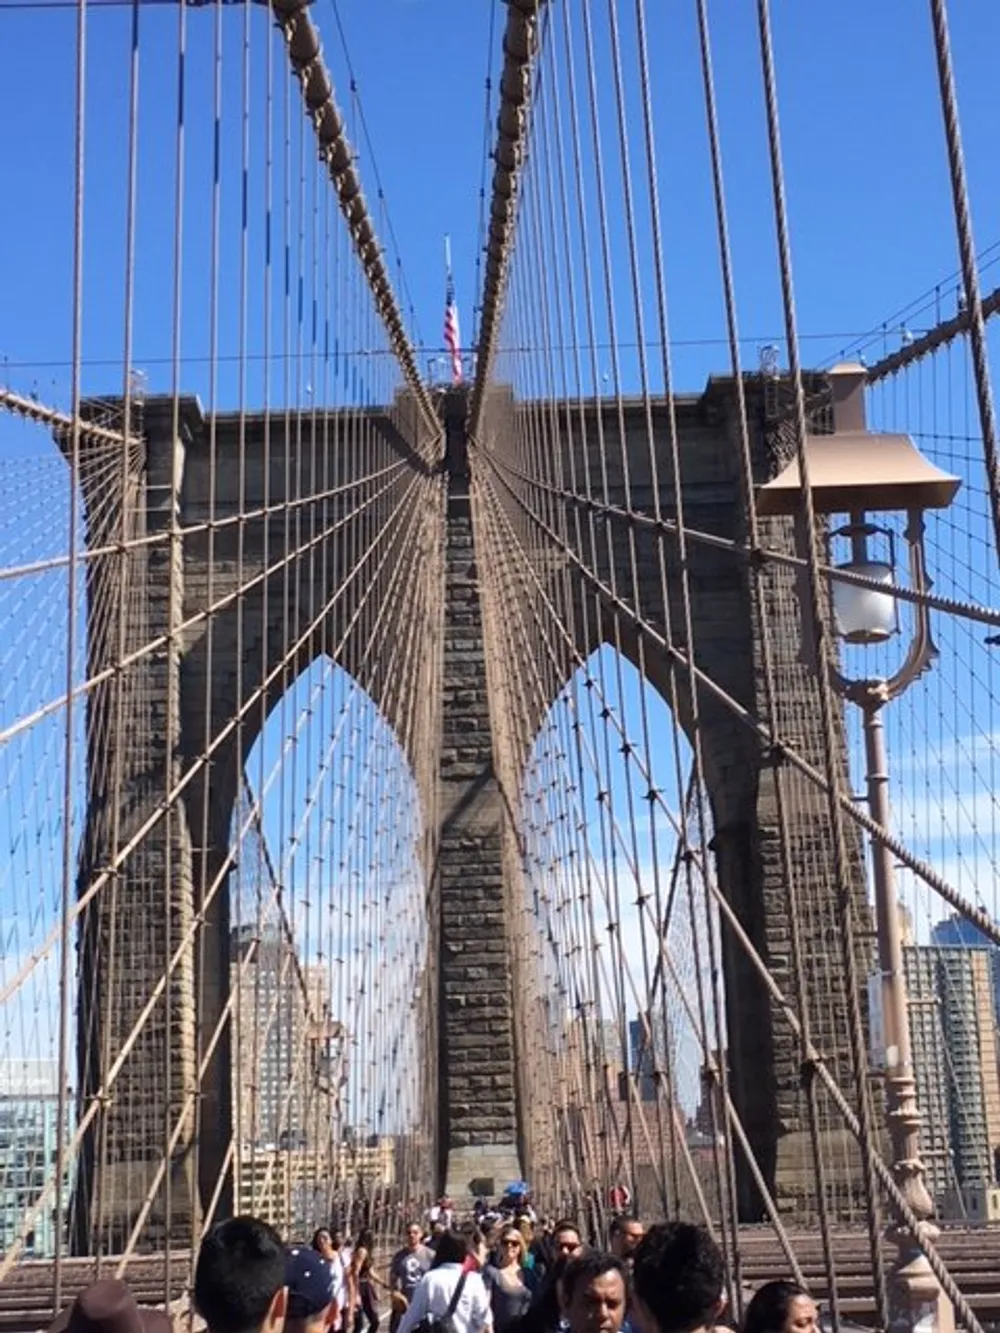 The image shows pedestrians walking along the walkway of the Brooklyn Bridge framed by its iconic suspension cables and stone towers against a clear blue sky